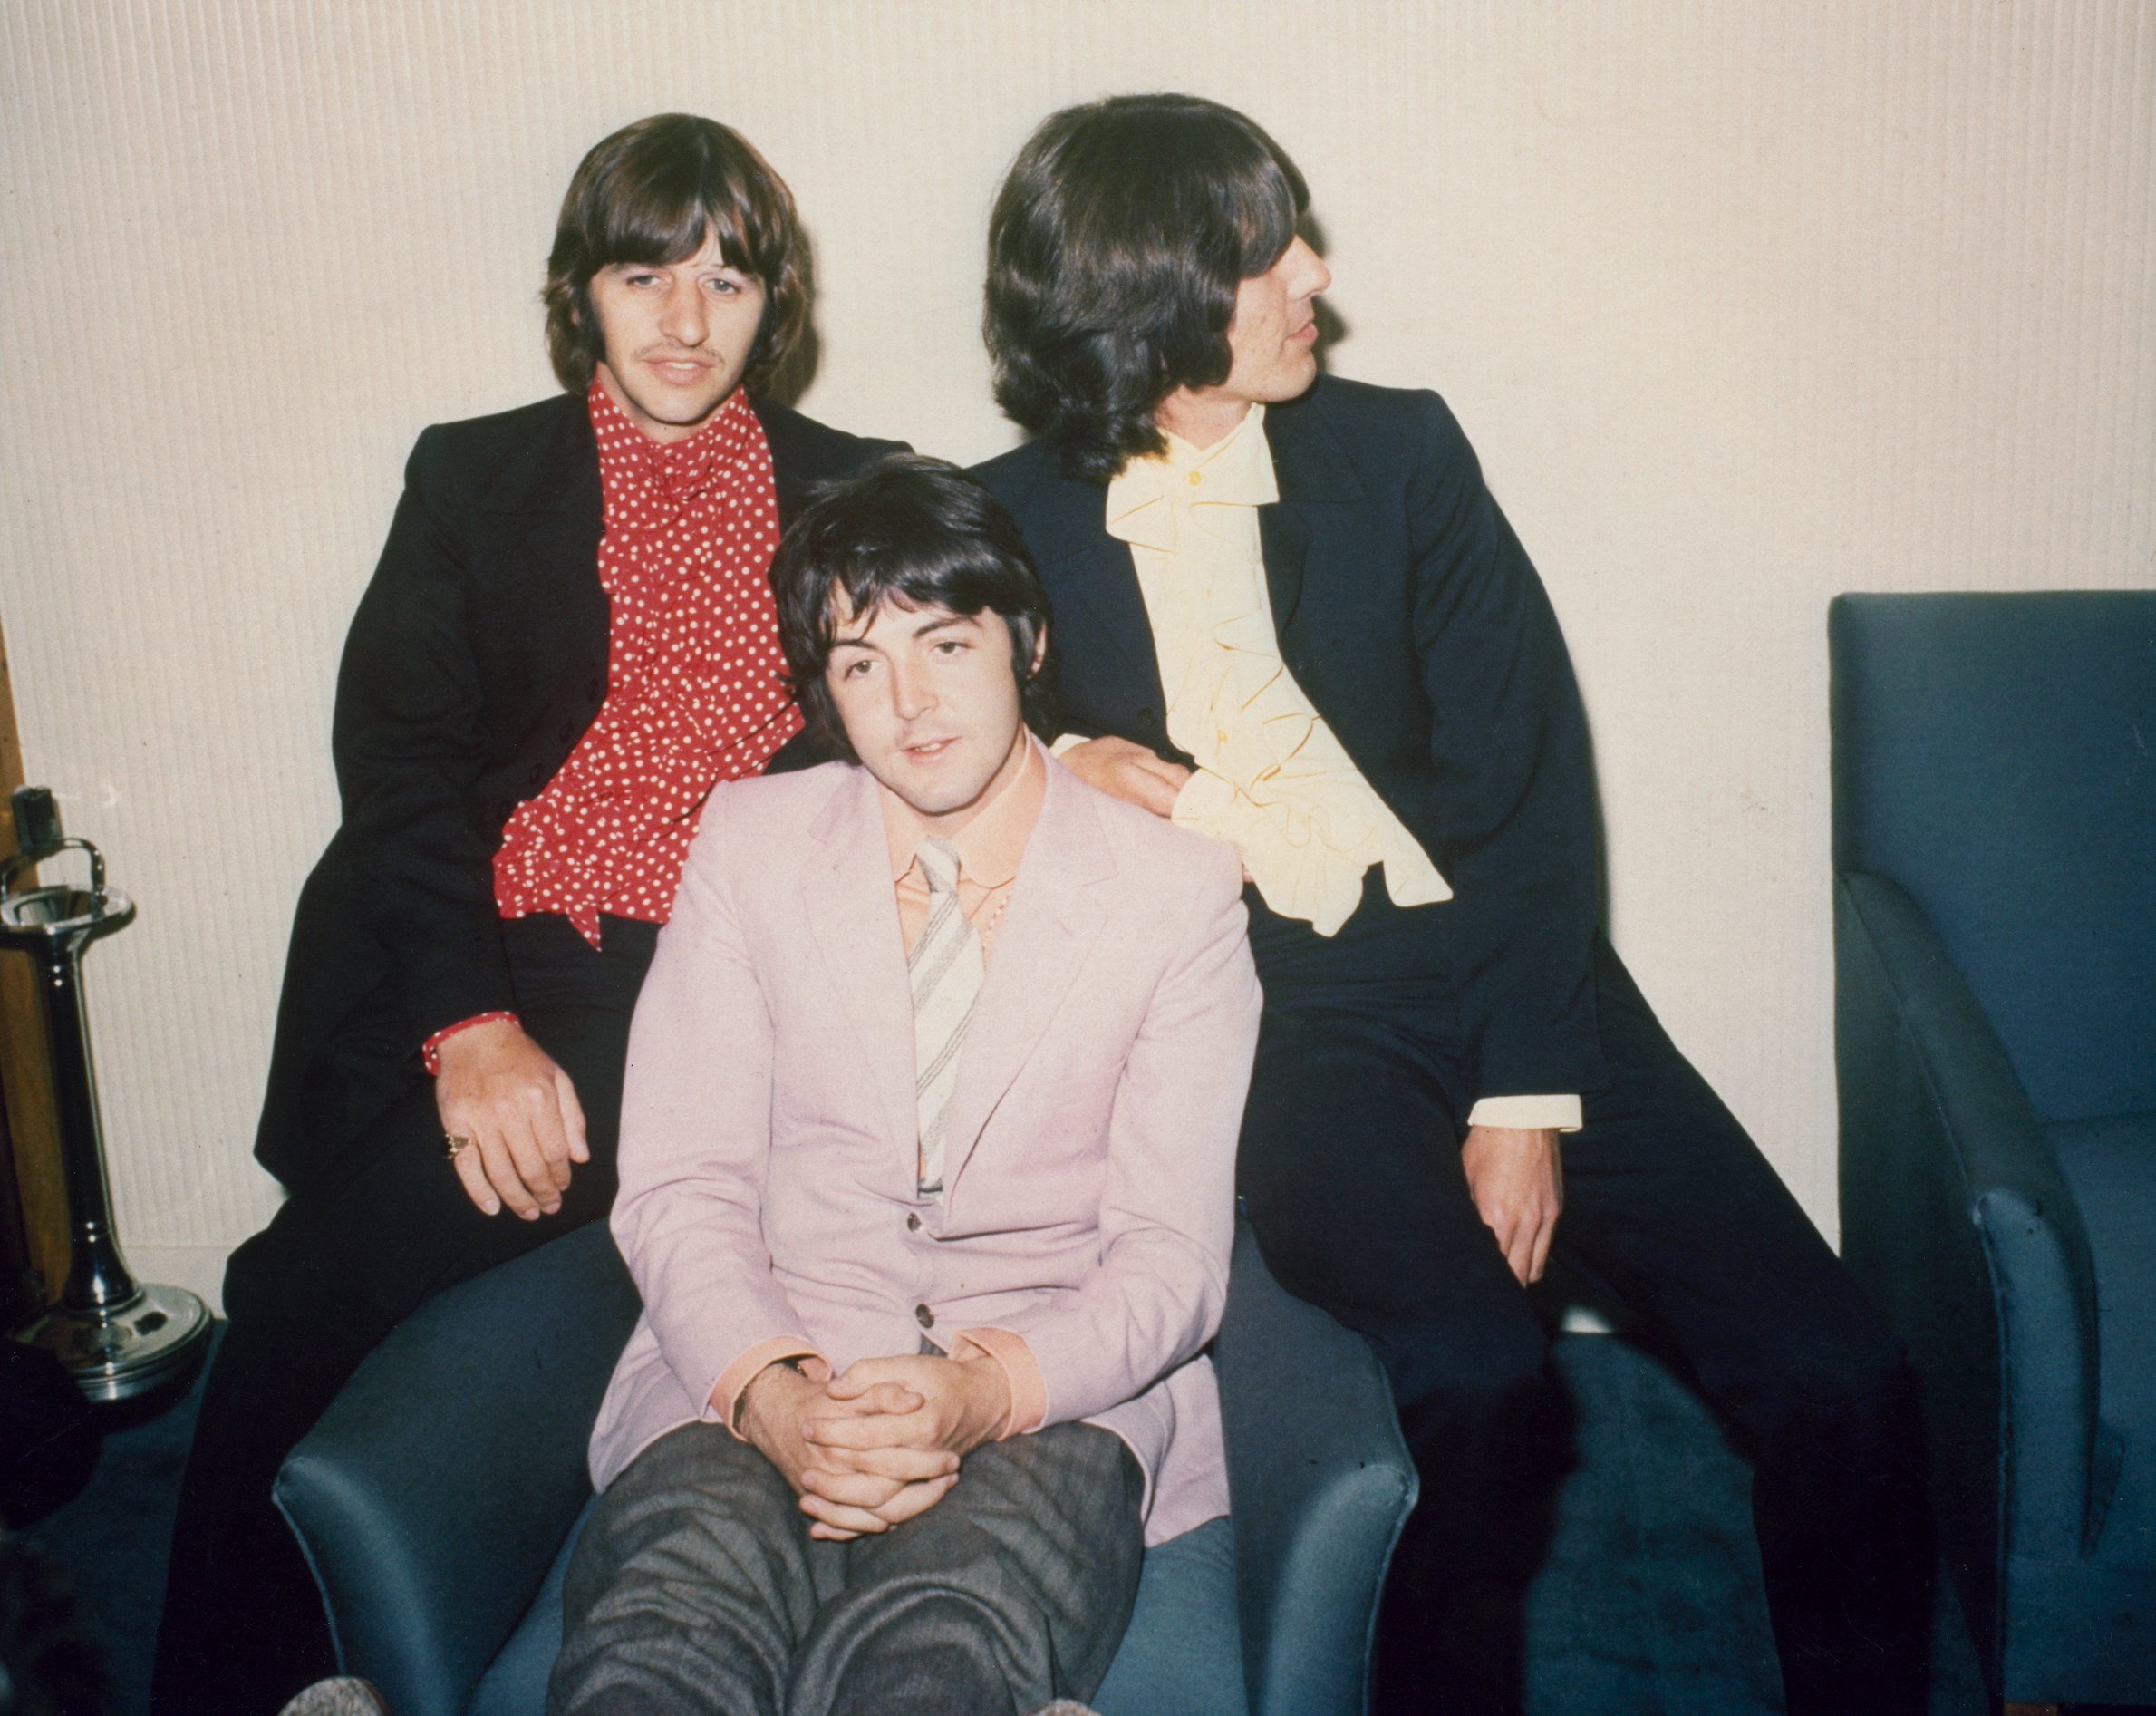 Ringo Starr, Paul McCartney, and George Harrison attend a press screening for Yellow Submarine